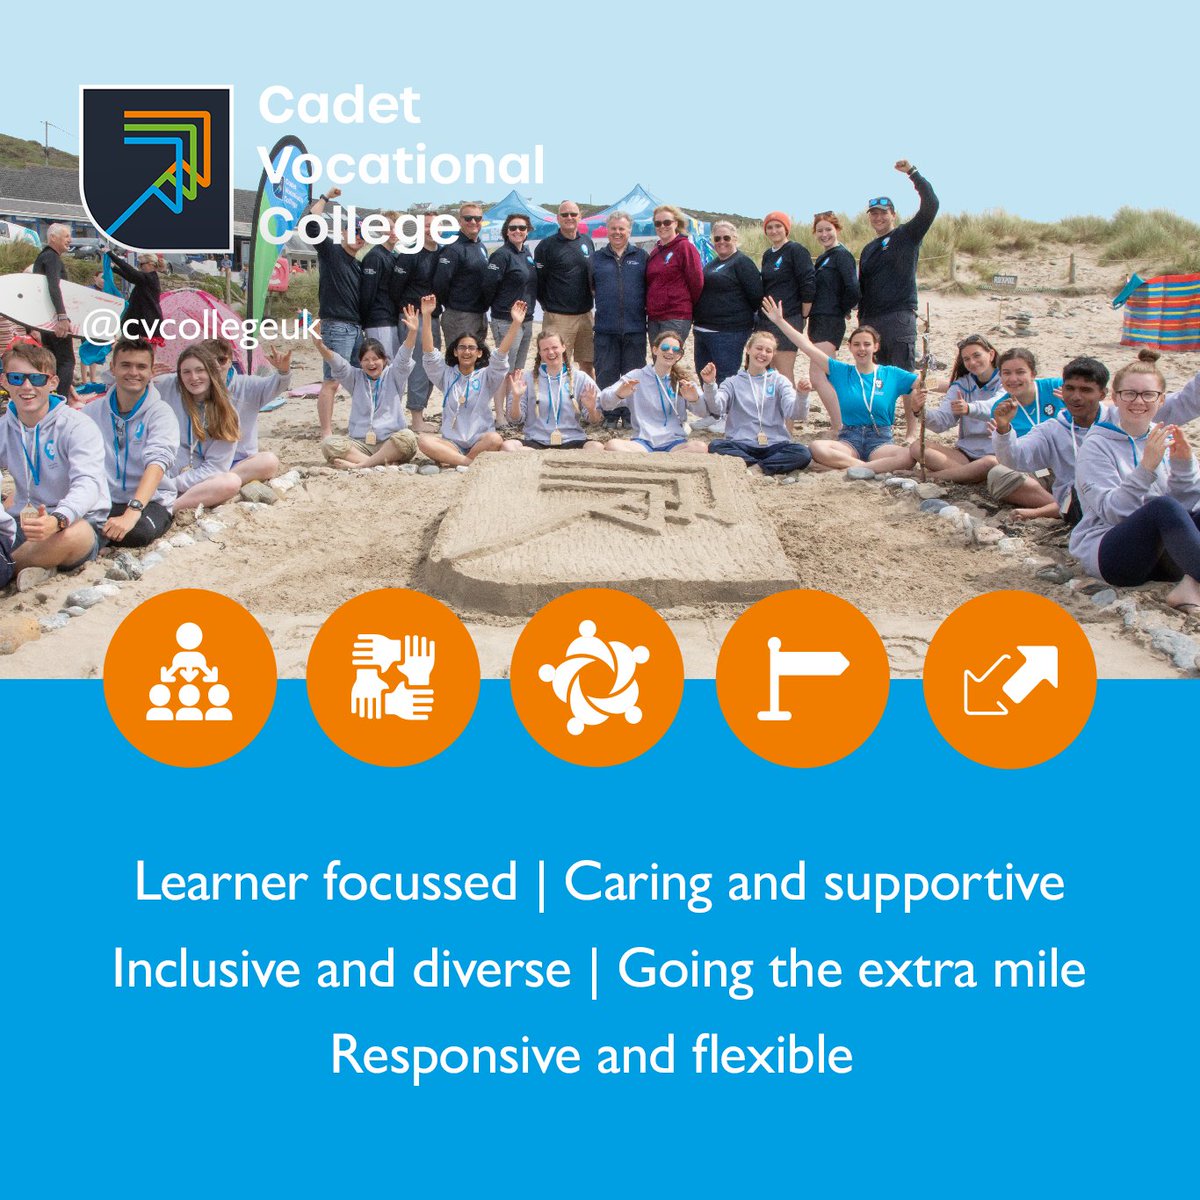 At Cadet Vocational College, we understand that our five key values are essential to improving lives through vocational education.

#CadetVocationalCollege #CVCollegeUK #LearnerFocussed #CaringAndSupportive #InclusiveAndDiverse #GoingTheExtraMile #ResponsiveAndFlexible